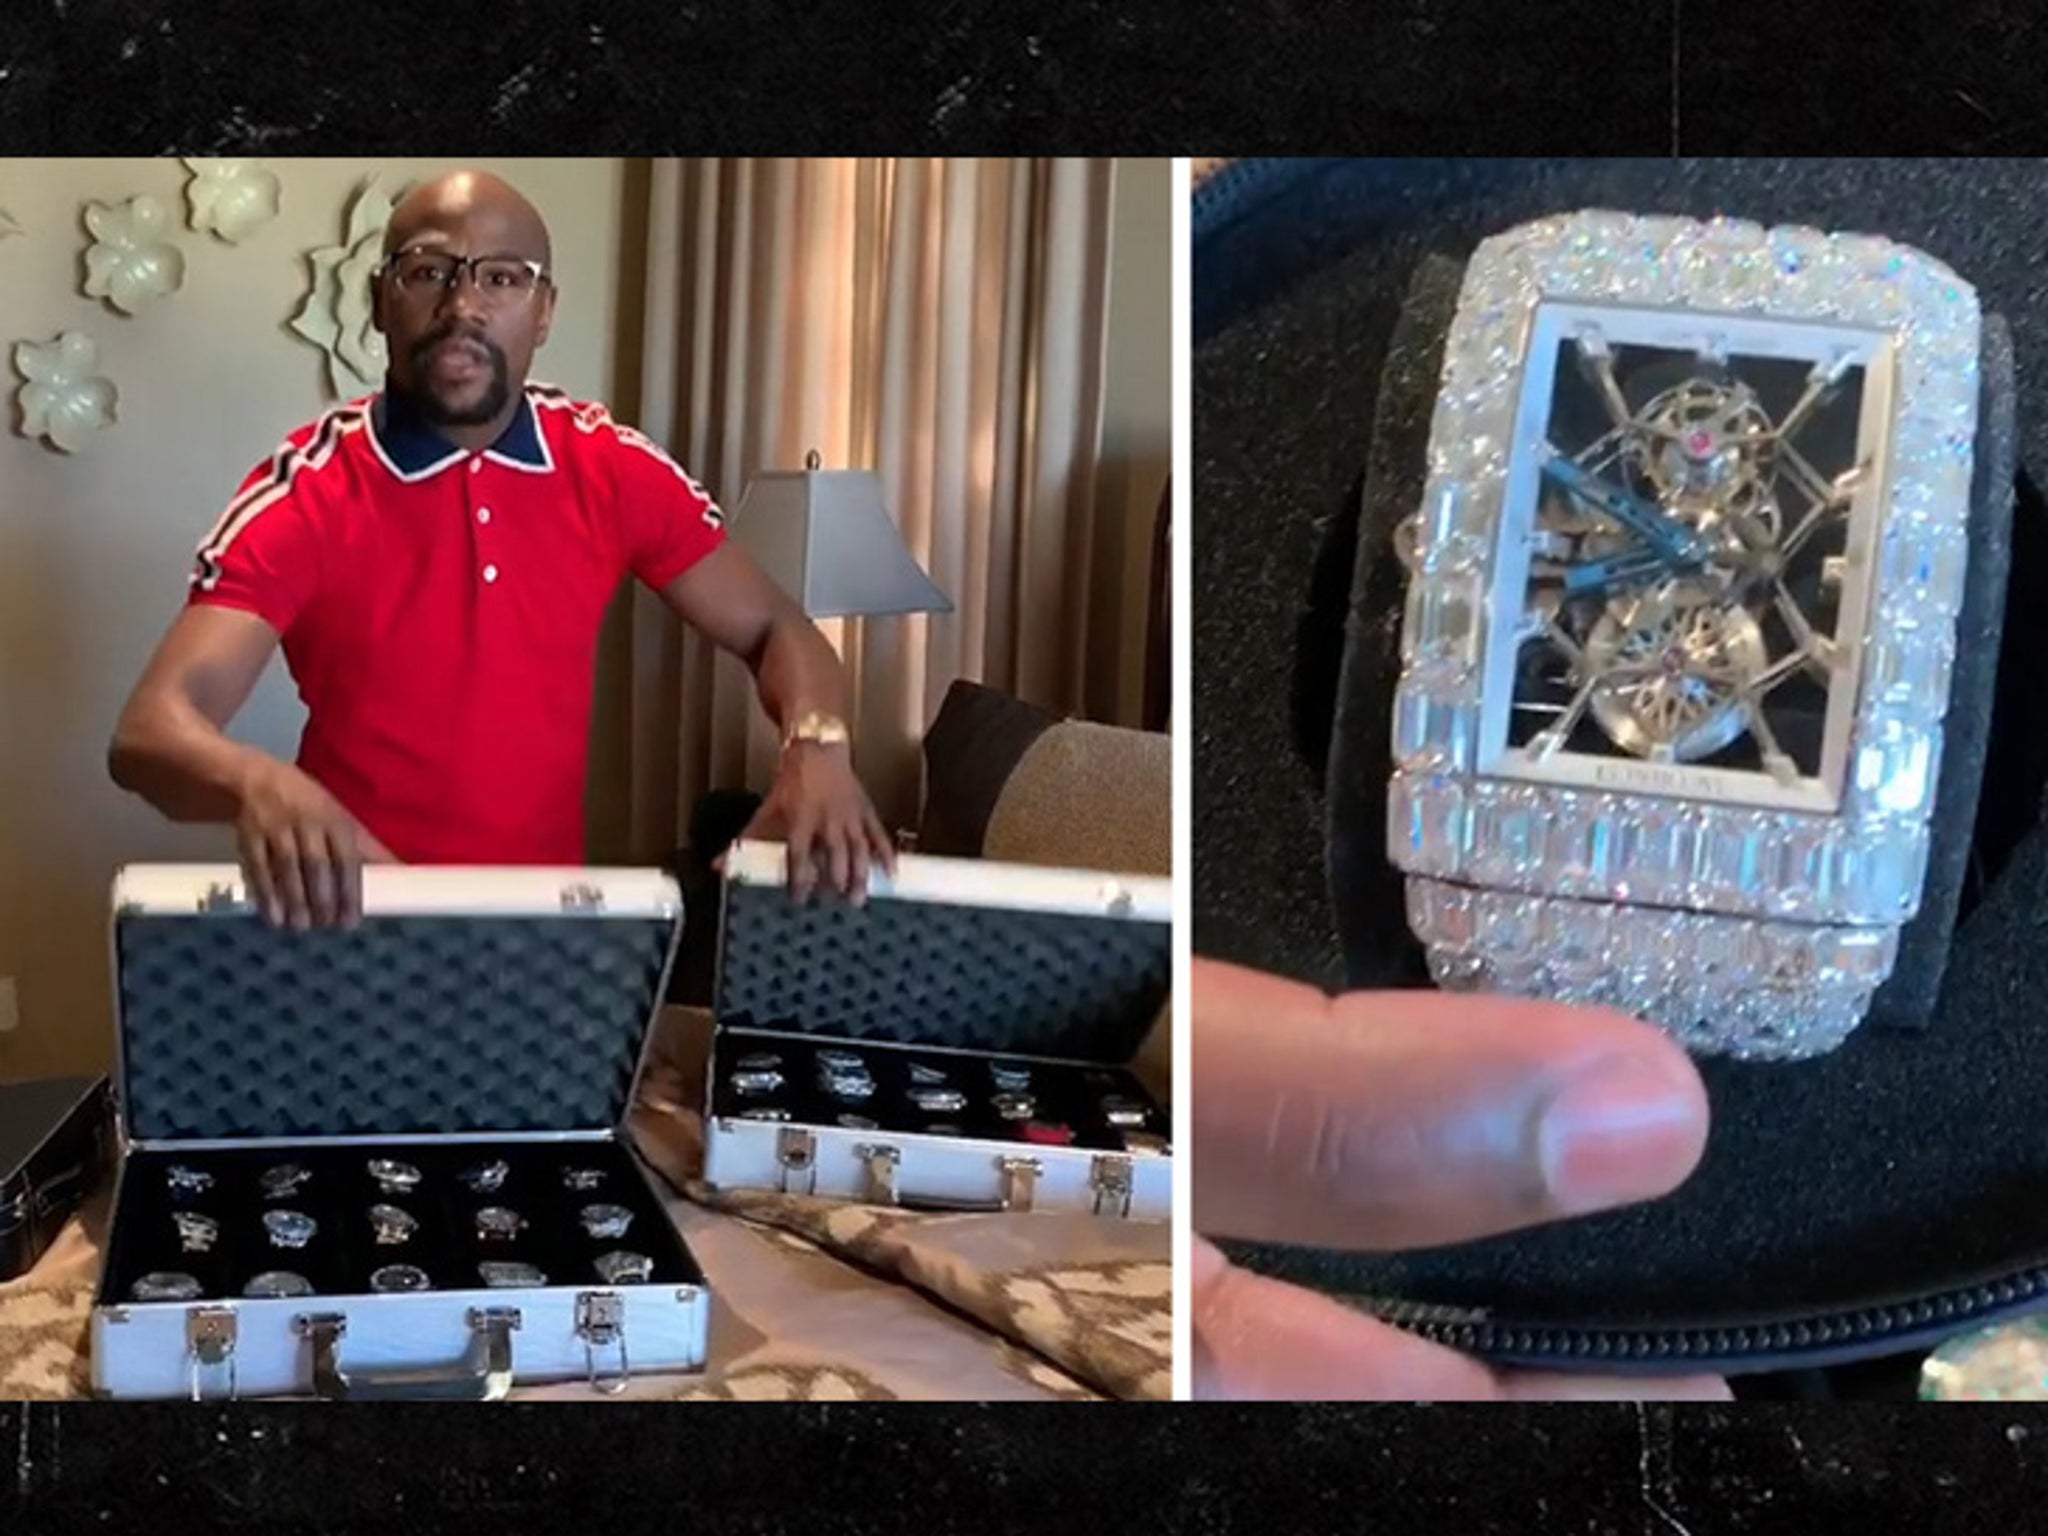 Floyd Mayweather Watch Collection